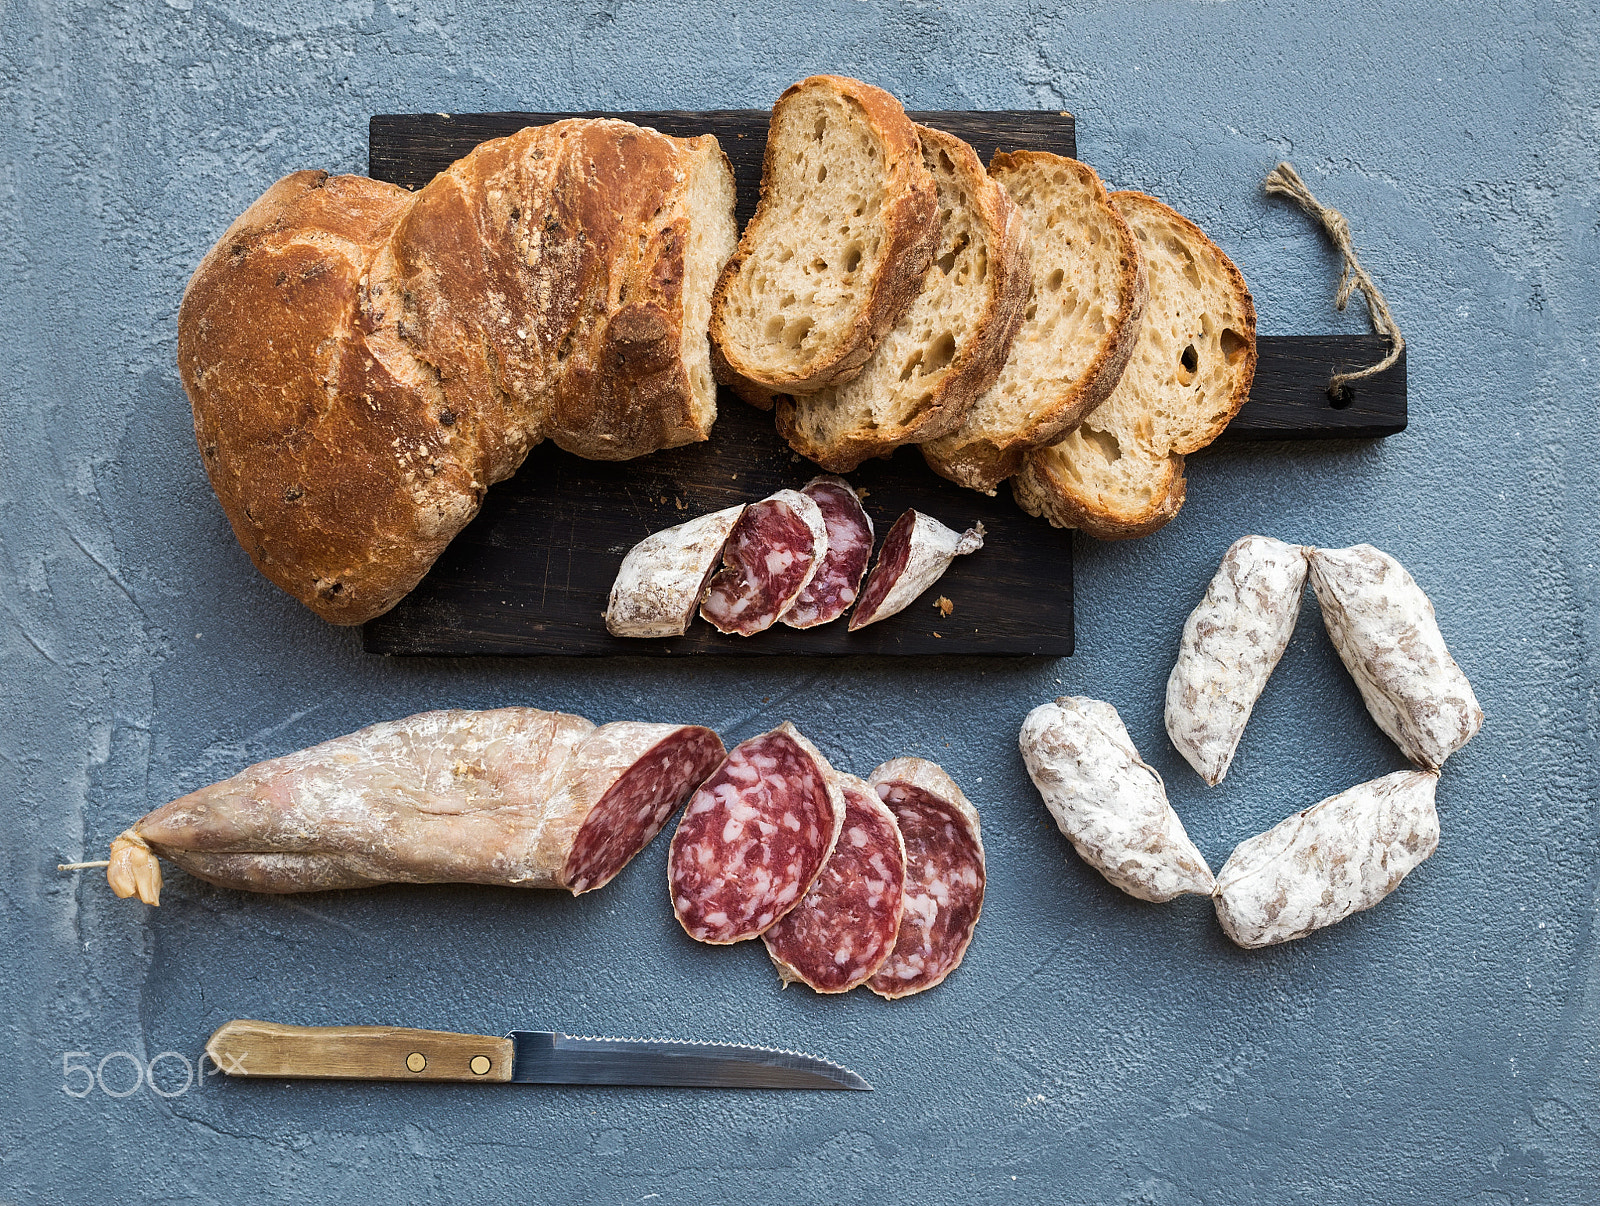 Nikon D610 + ZEISS Distagon T* 35mm F2 sample photo. Wine snack set. italian slami sausages and rustic bread on dark wooden board over a rough grey-blue  photography